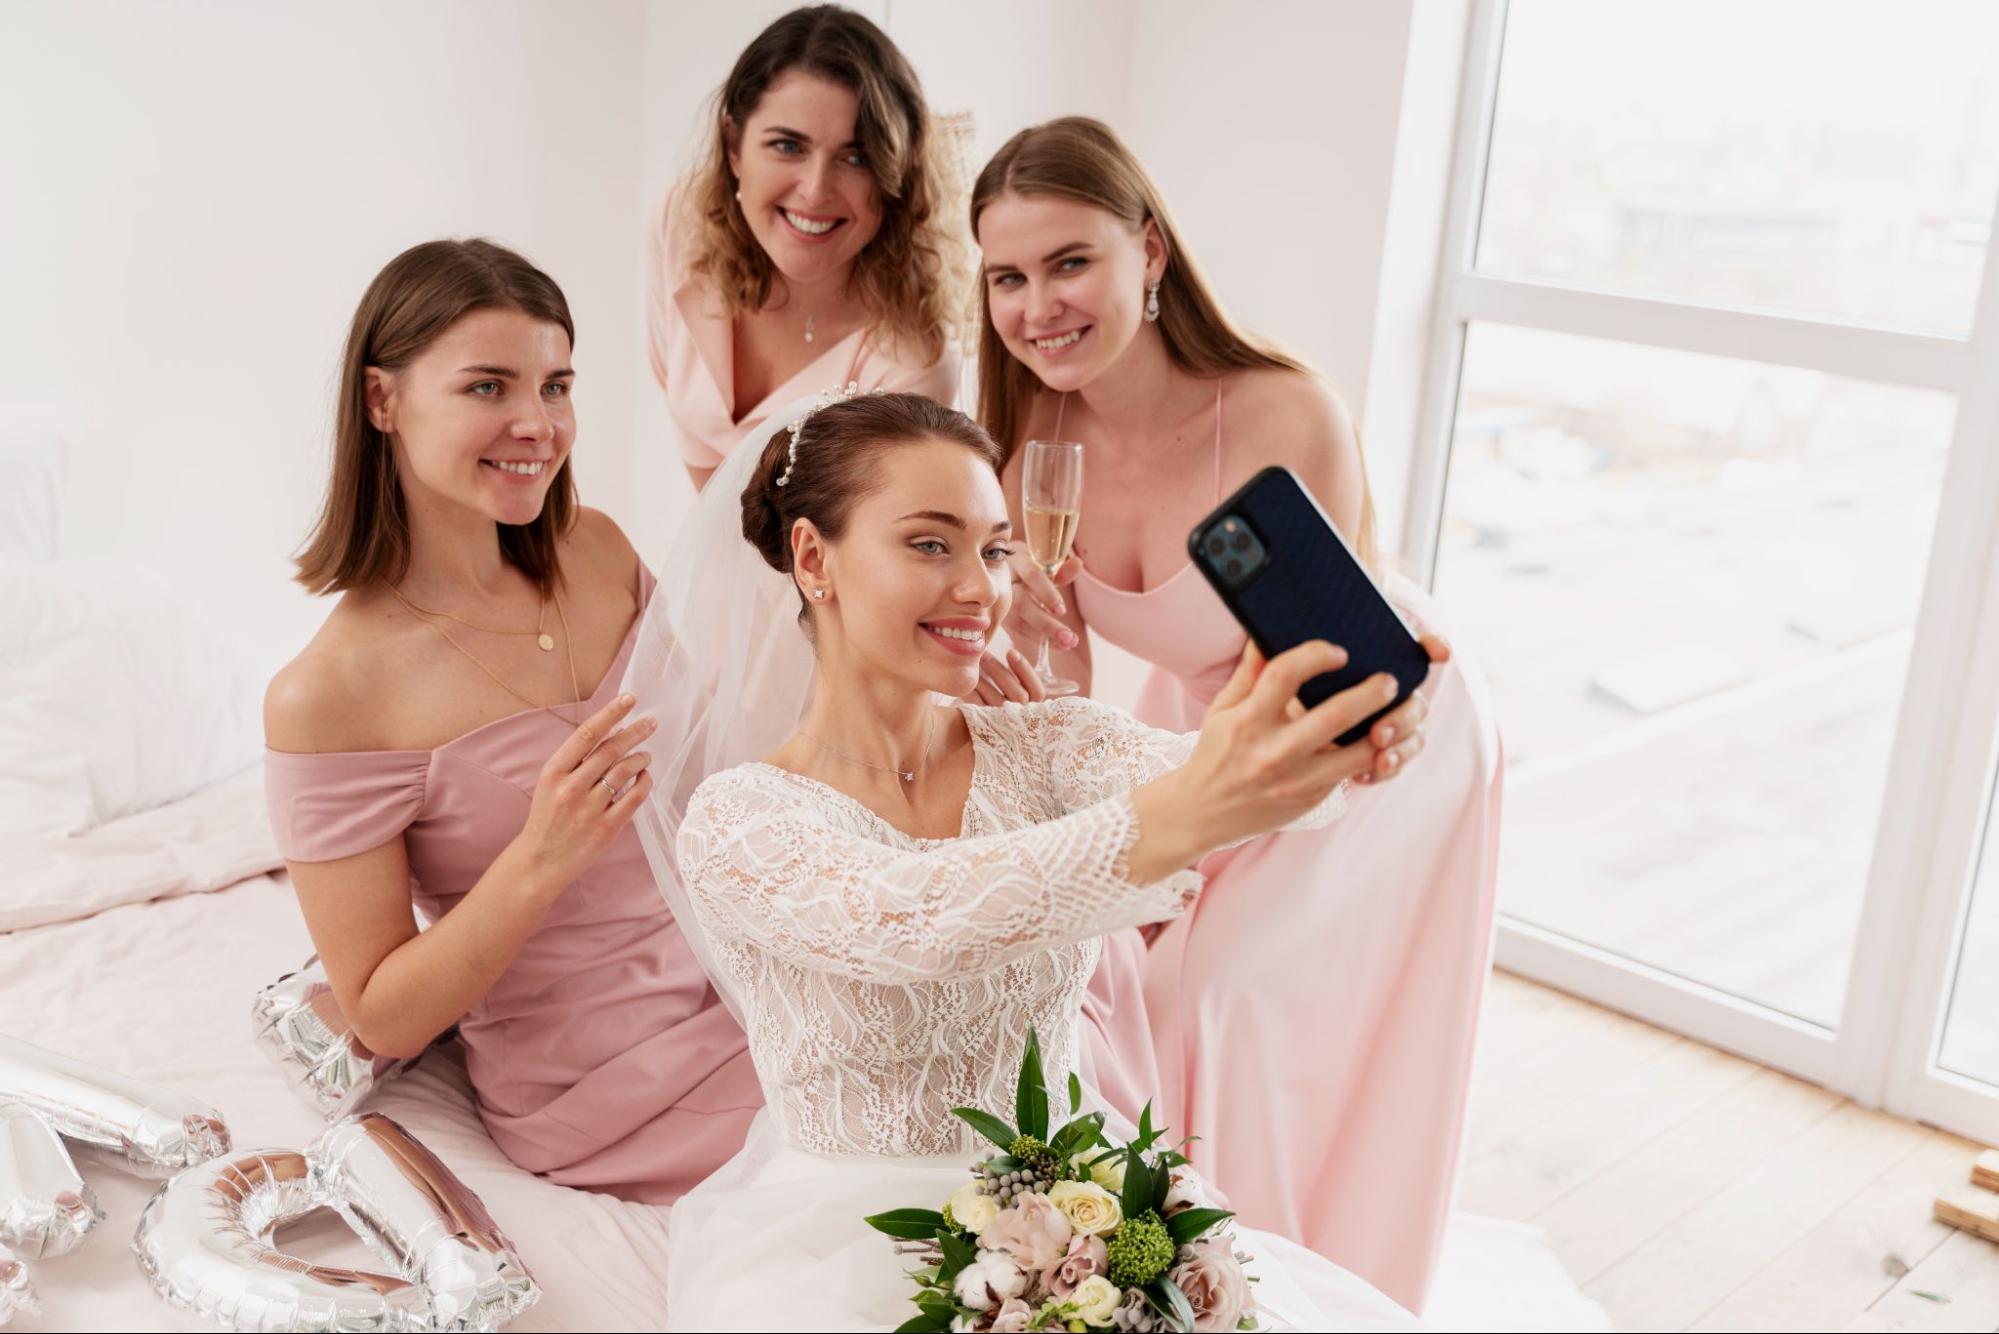 Wedding Makeup and Hairstyles for Mothers and Bridesmaids: Expert Recommendations